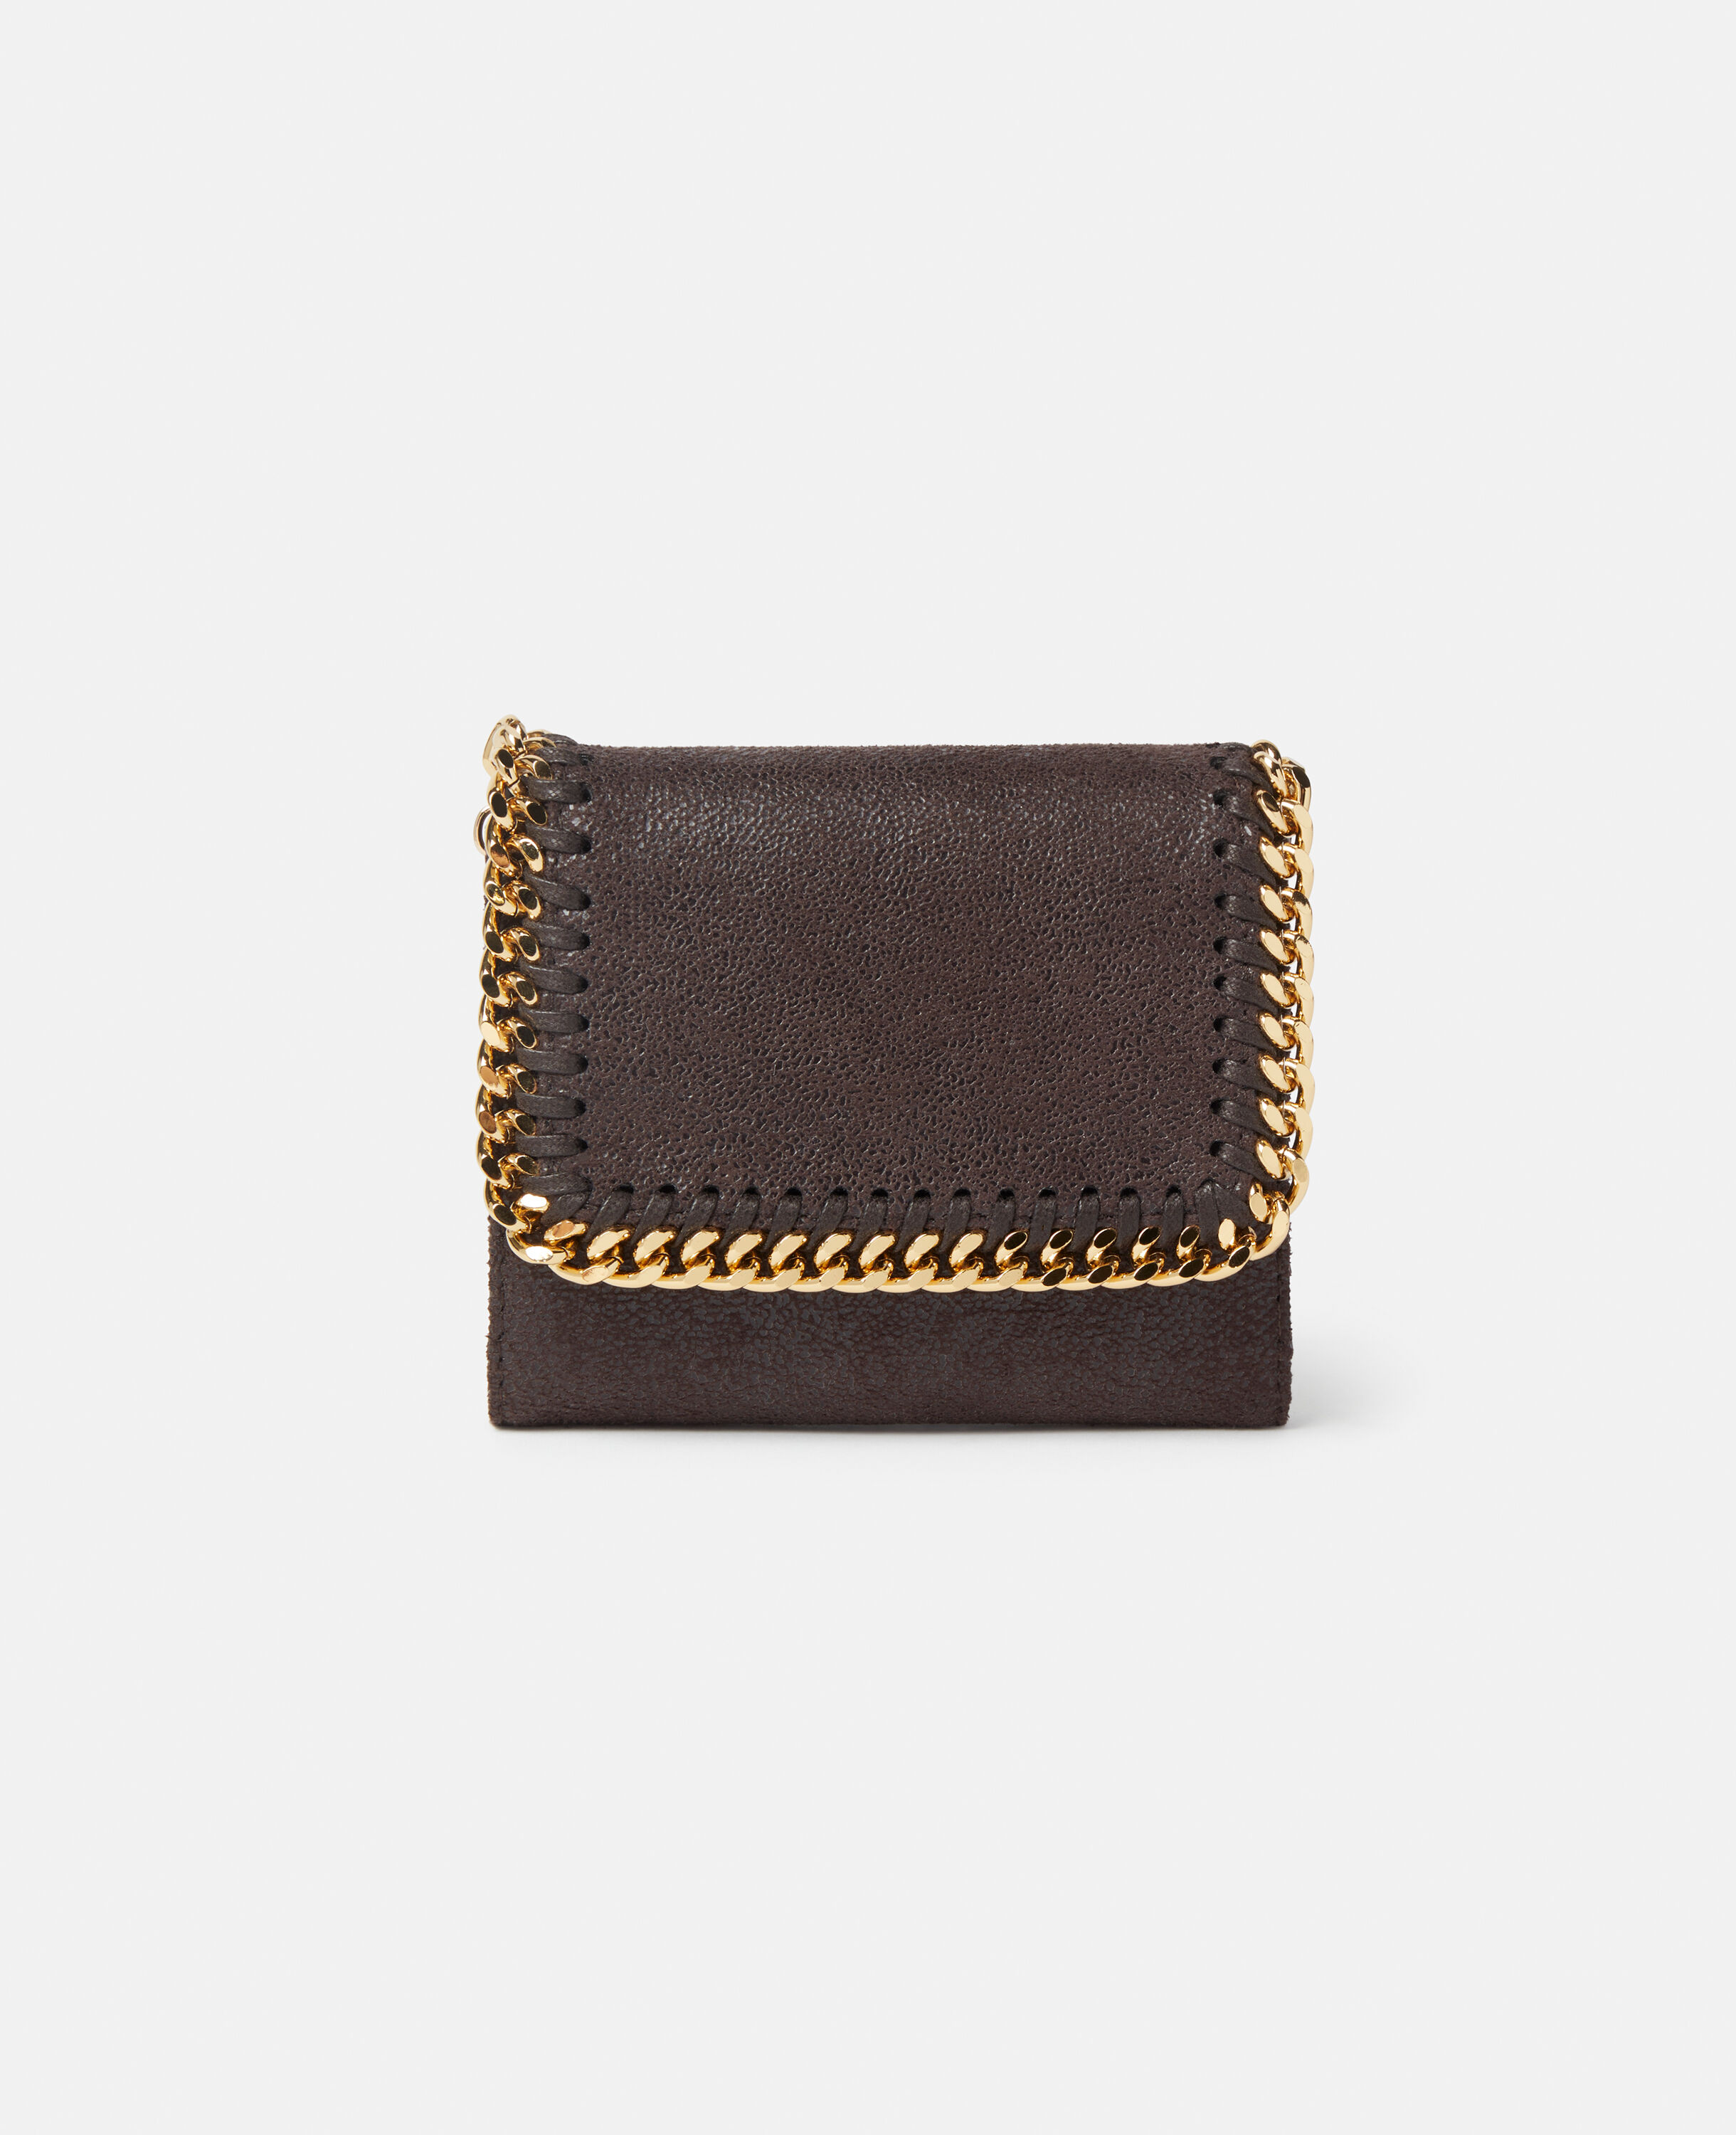 Stella McCartney Mini Falabella Flap Wallet in Black Womens Accessories Wallets and cardholders 